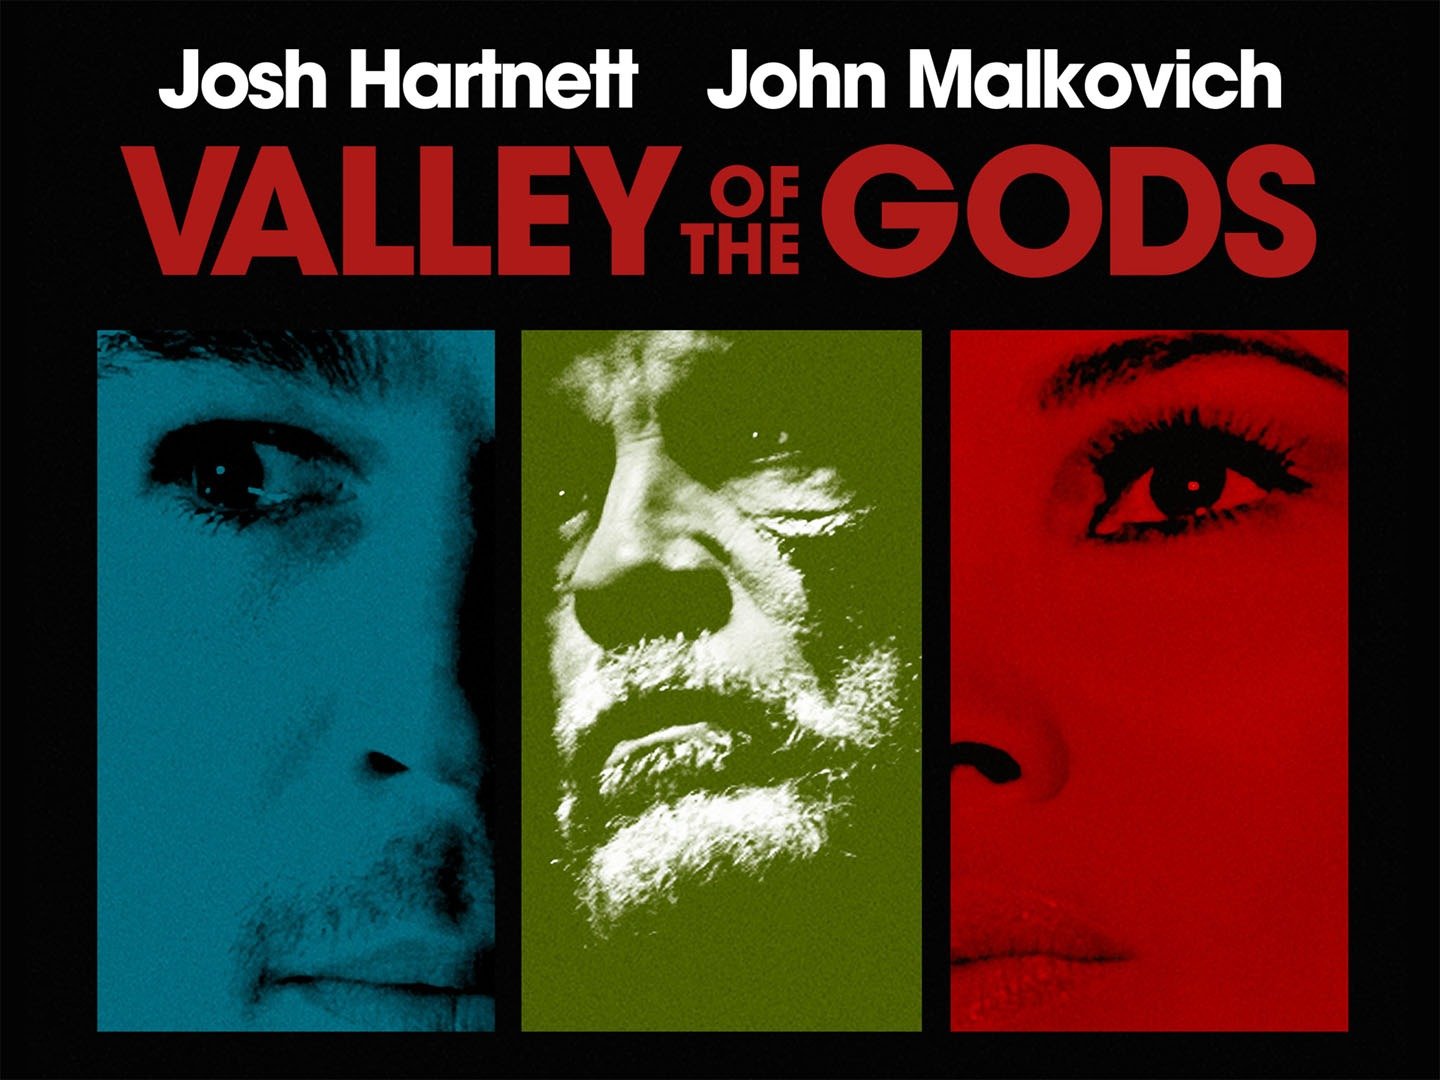 valley of the gods movie review